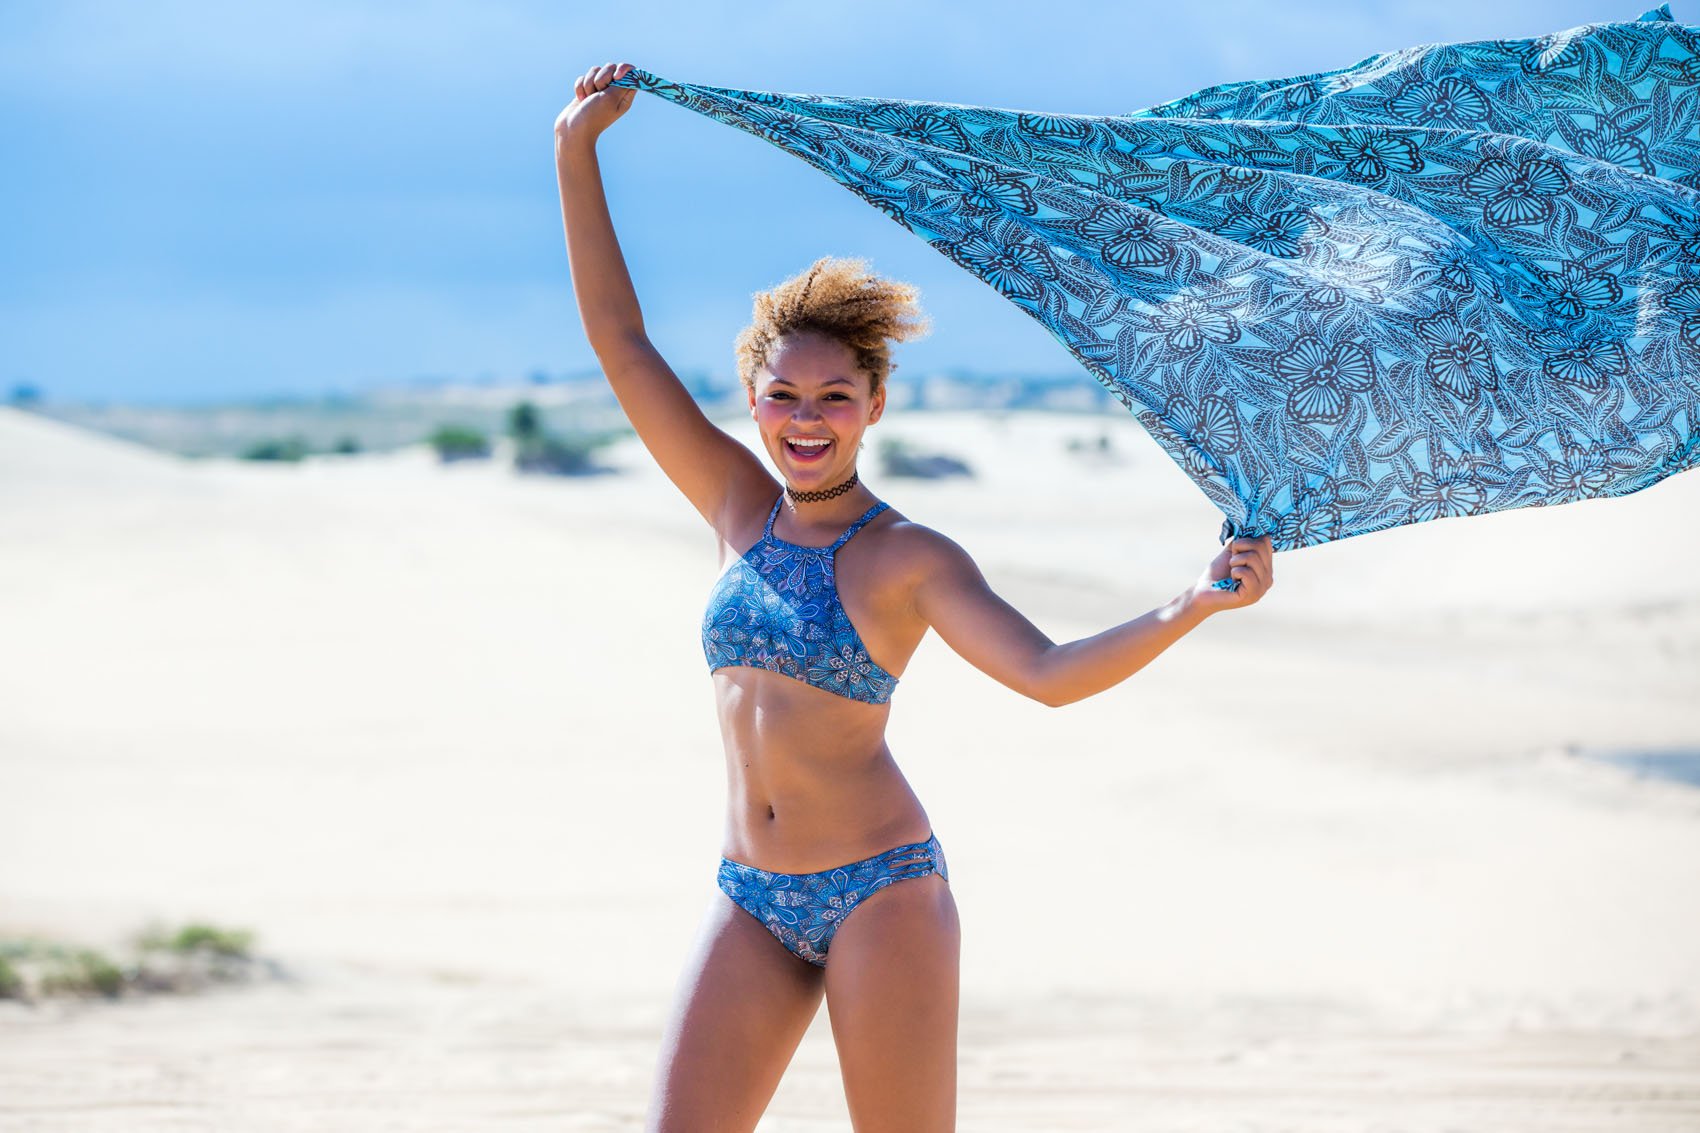 Teenage girl laughing while holding up a scarf on a white sandy beach in a blue swimsuit